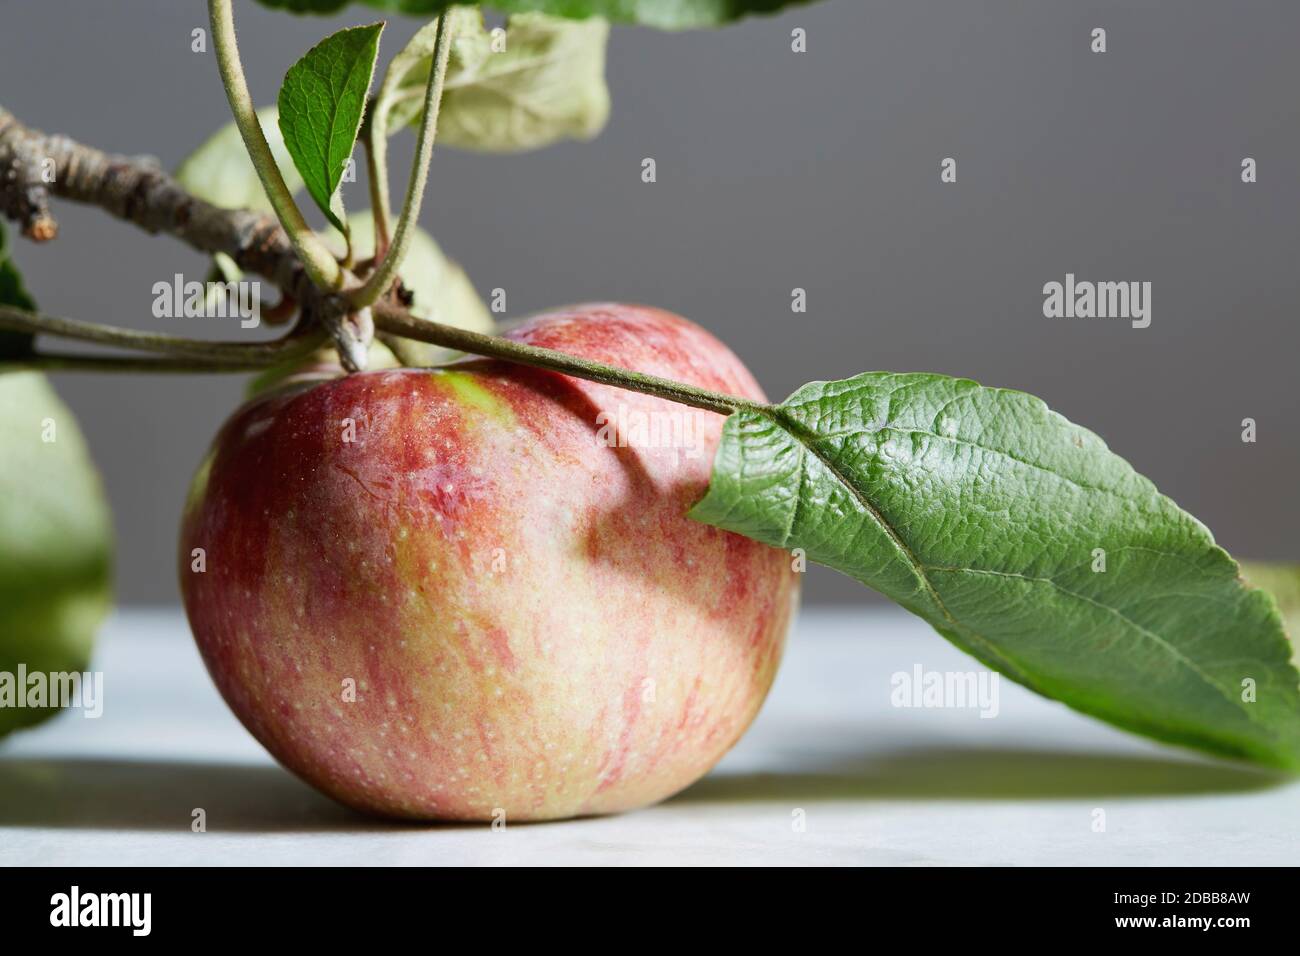 Close up of apple with stem and leaf Stock Photo